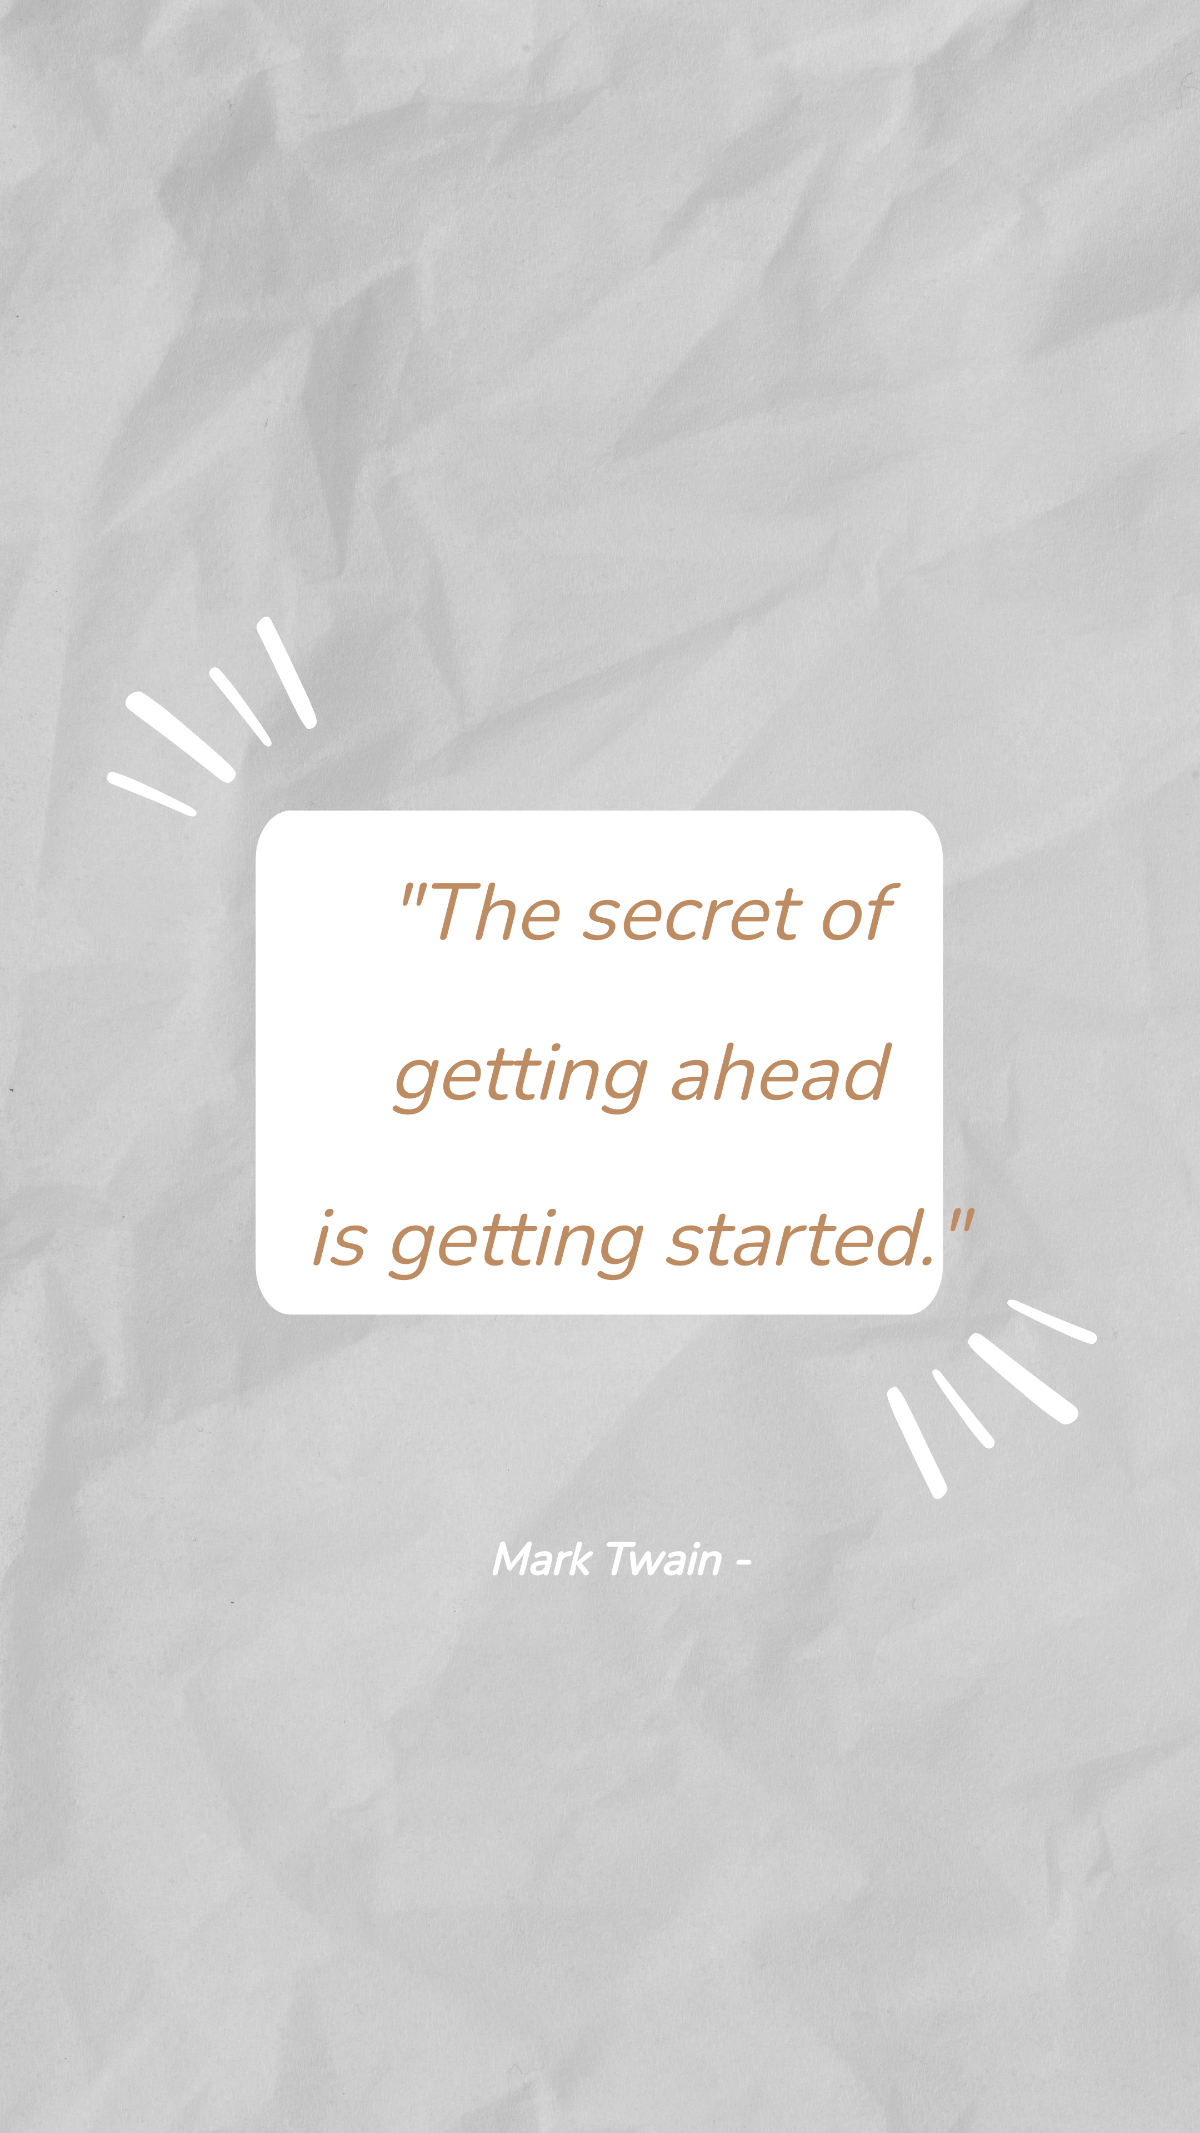 Mark Twain - The secret of getting ahead is getting started. Template